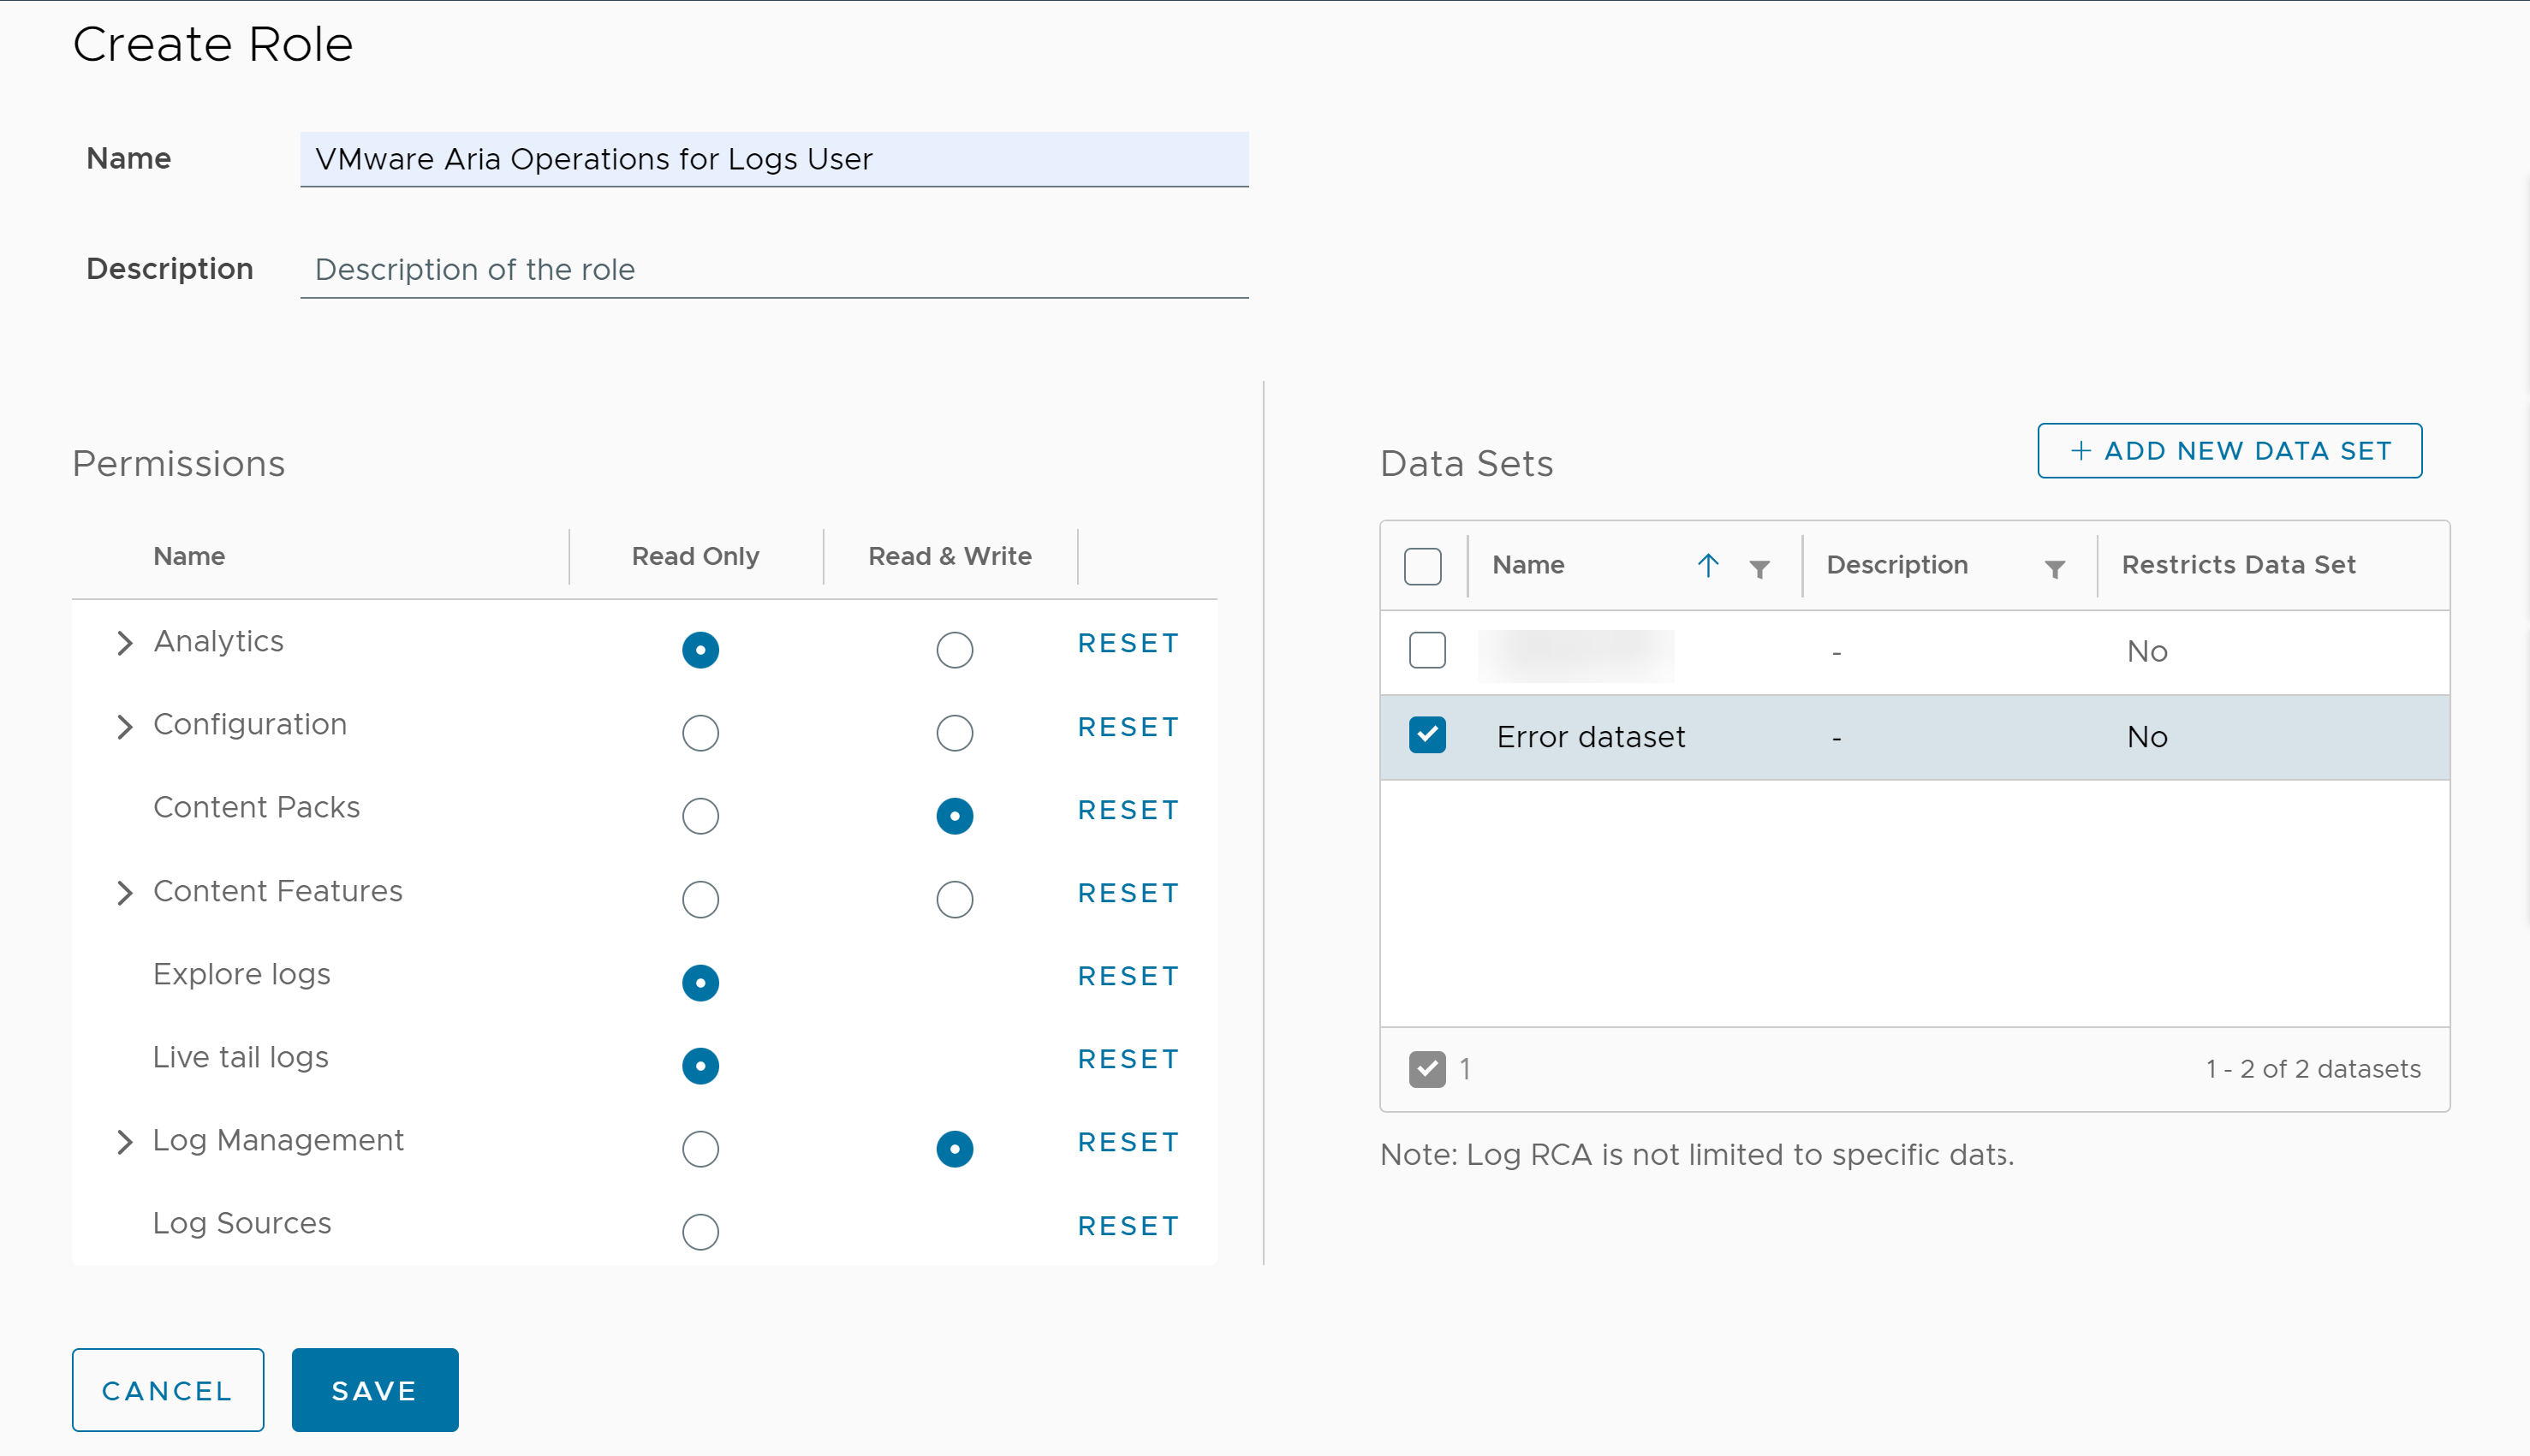 Creating roles in VMware Aria Operations for Logs (SaaS).